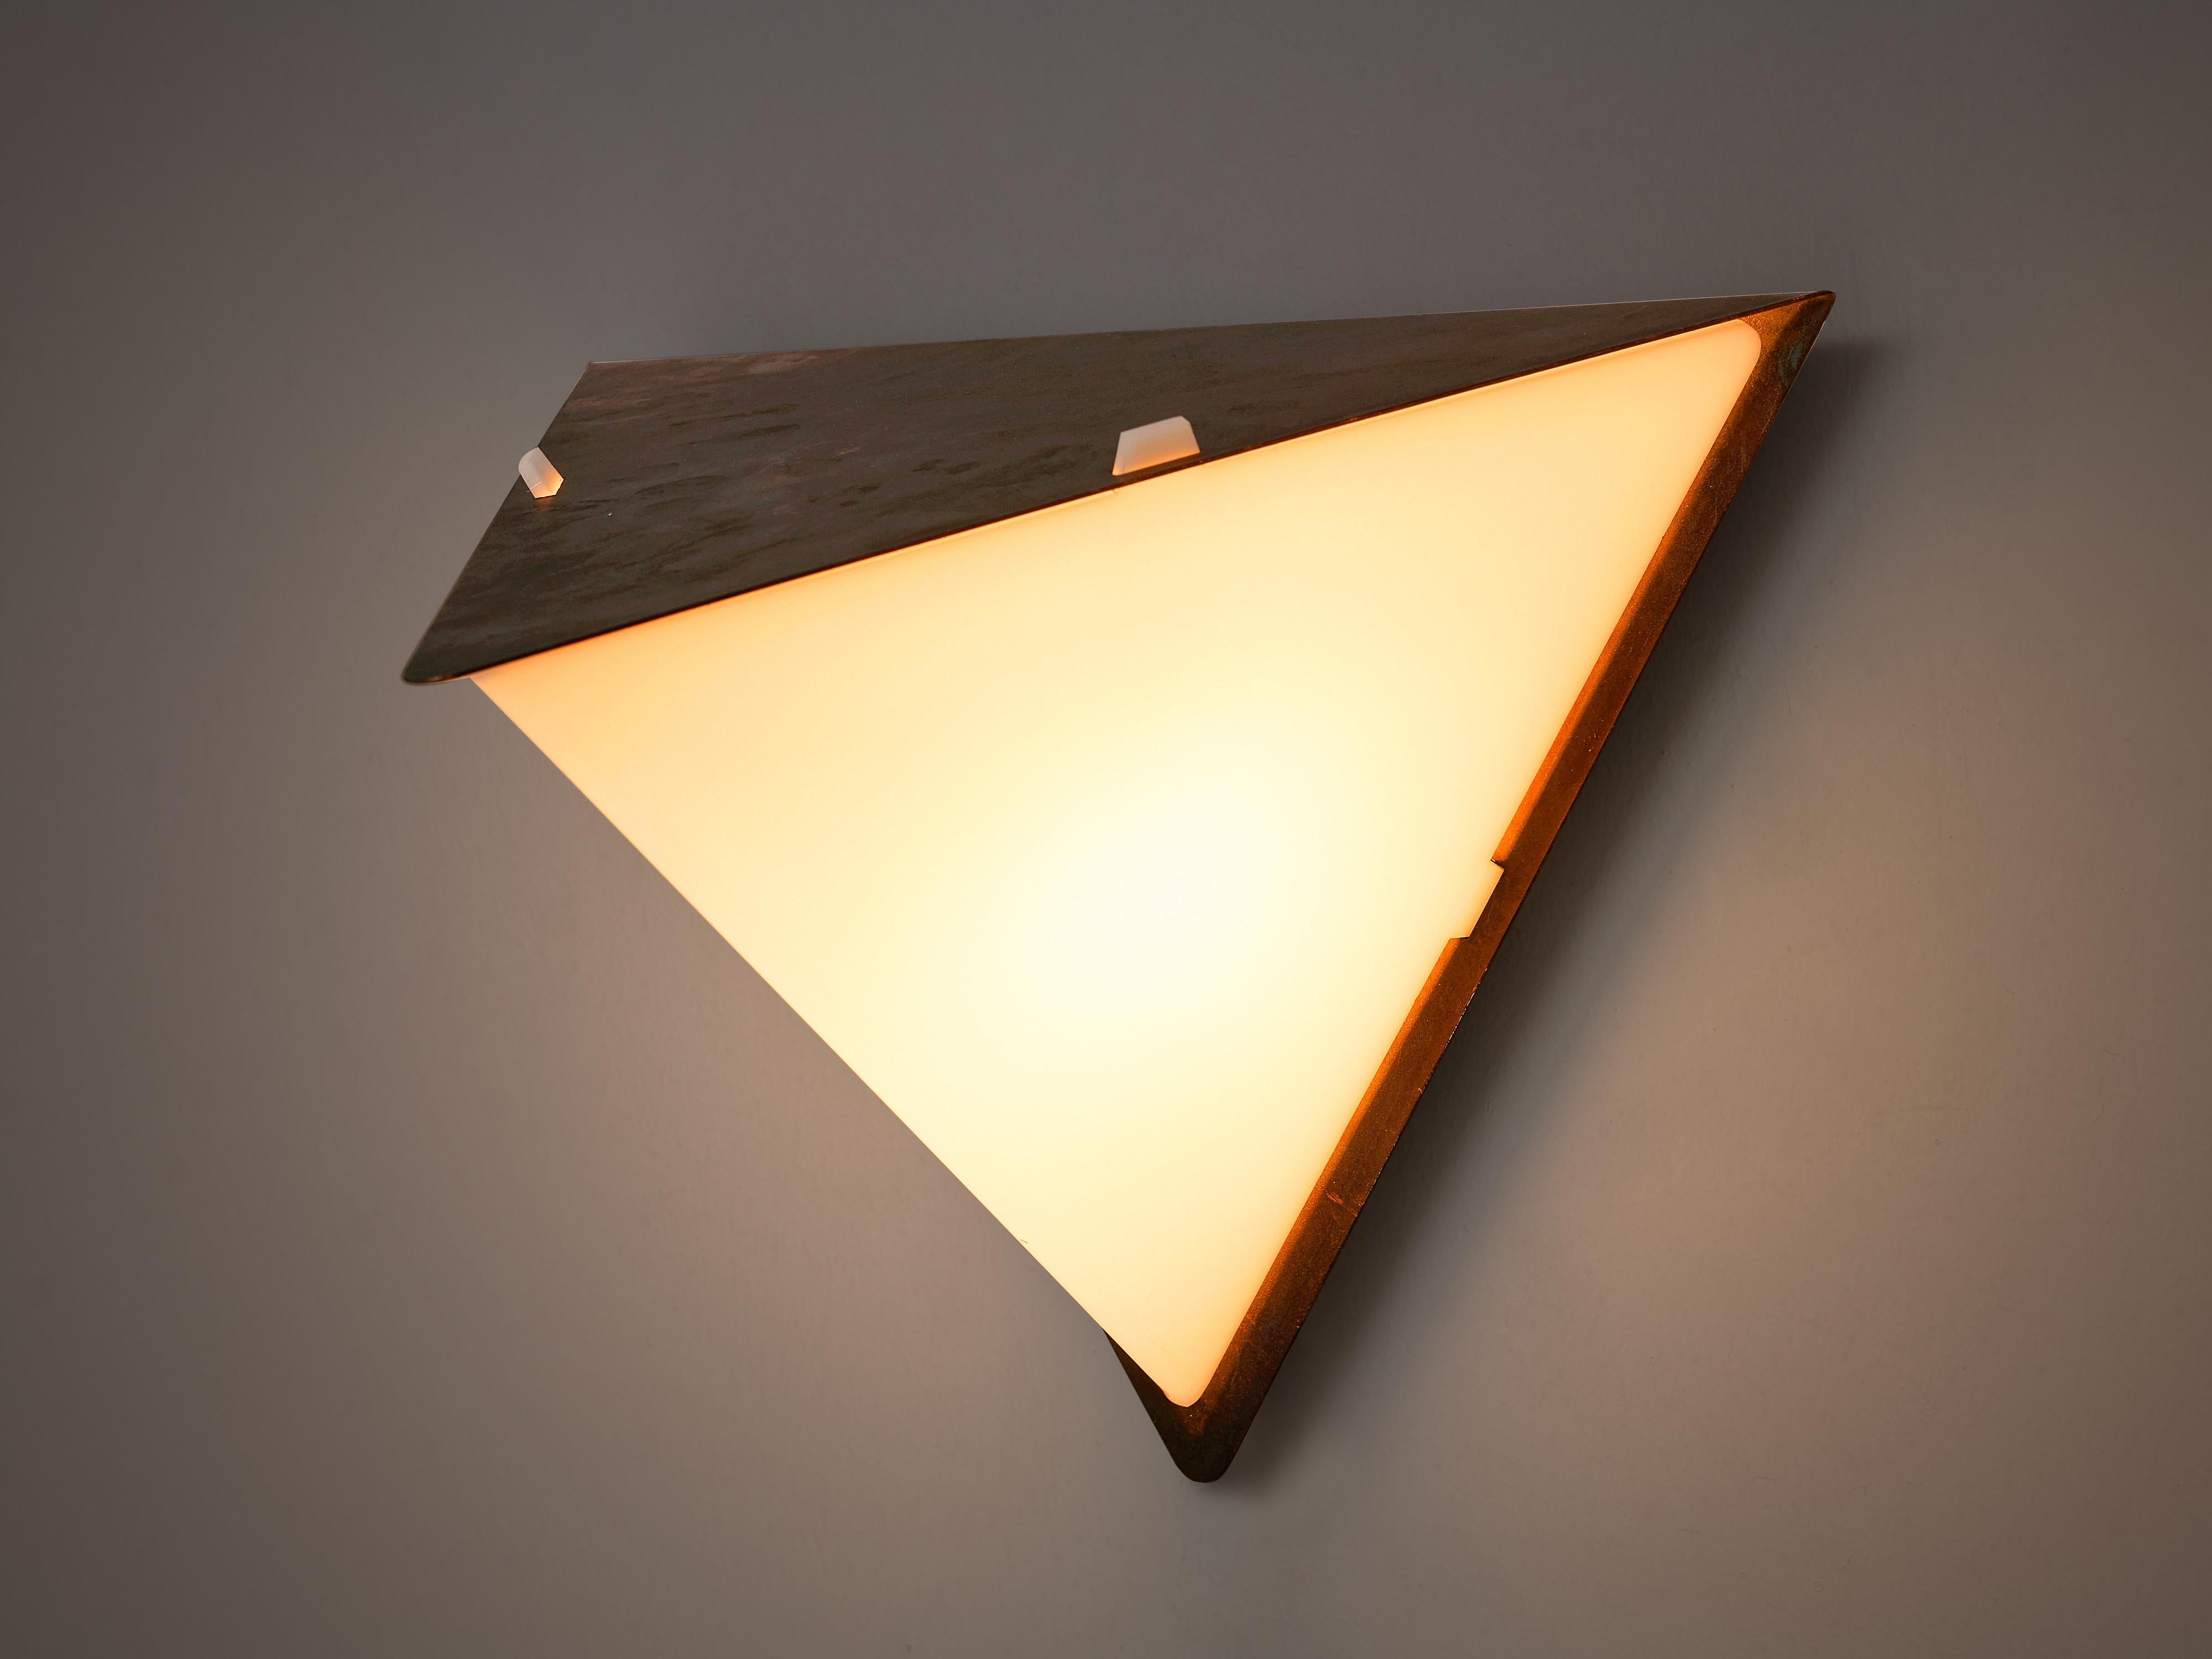 Hans-Agne Jakobsson, wall light, copper, acrylic, Sweden, 1960s

The shape of this wall light consists of multiple triangles. Firstly two connected triangles in copper form the wall fixation and the top. Two more triangles in acrylic fill out the